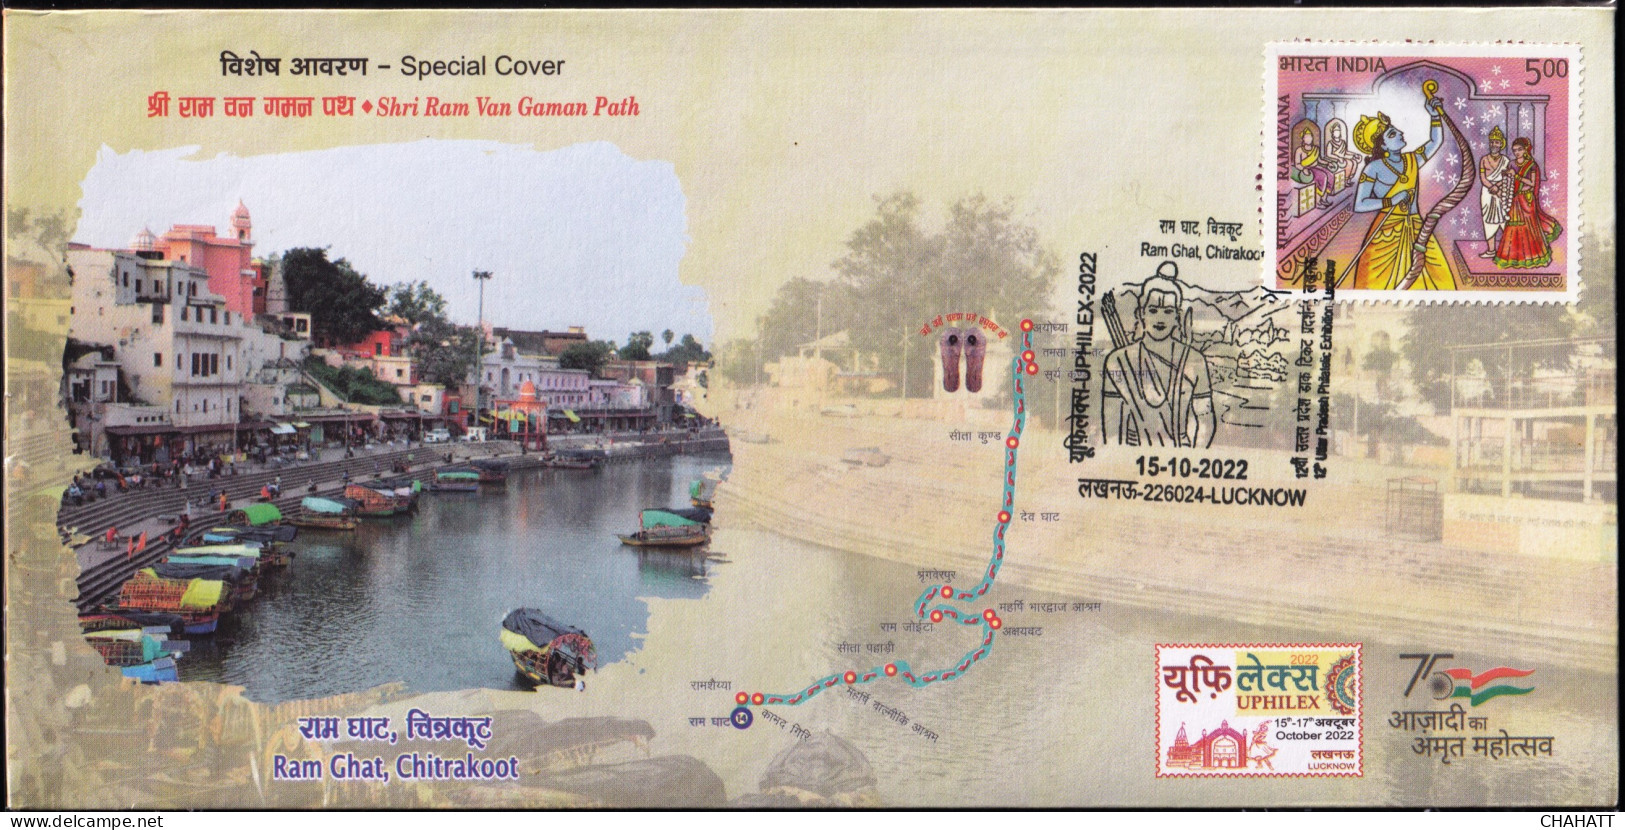 HINDUISM - RAMAYAN-  ARCHERY, RAMGHAT, CHITRAKOOT - PICTORIAL CANCELLATION - SPECIAL COVER - INDIA -2022- BX4-23 - Hindoeïsme